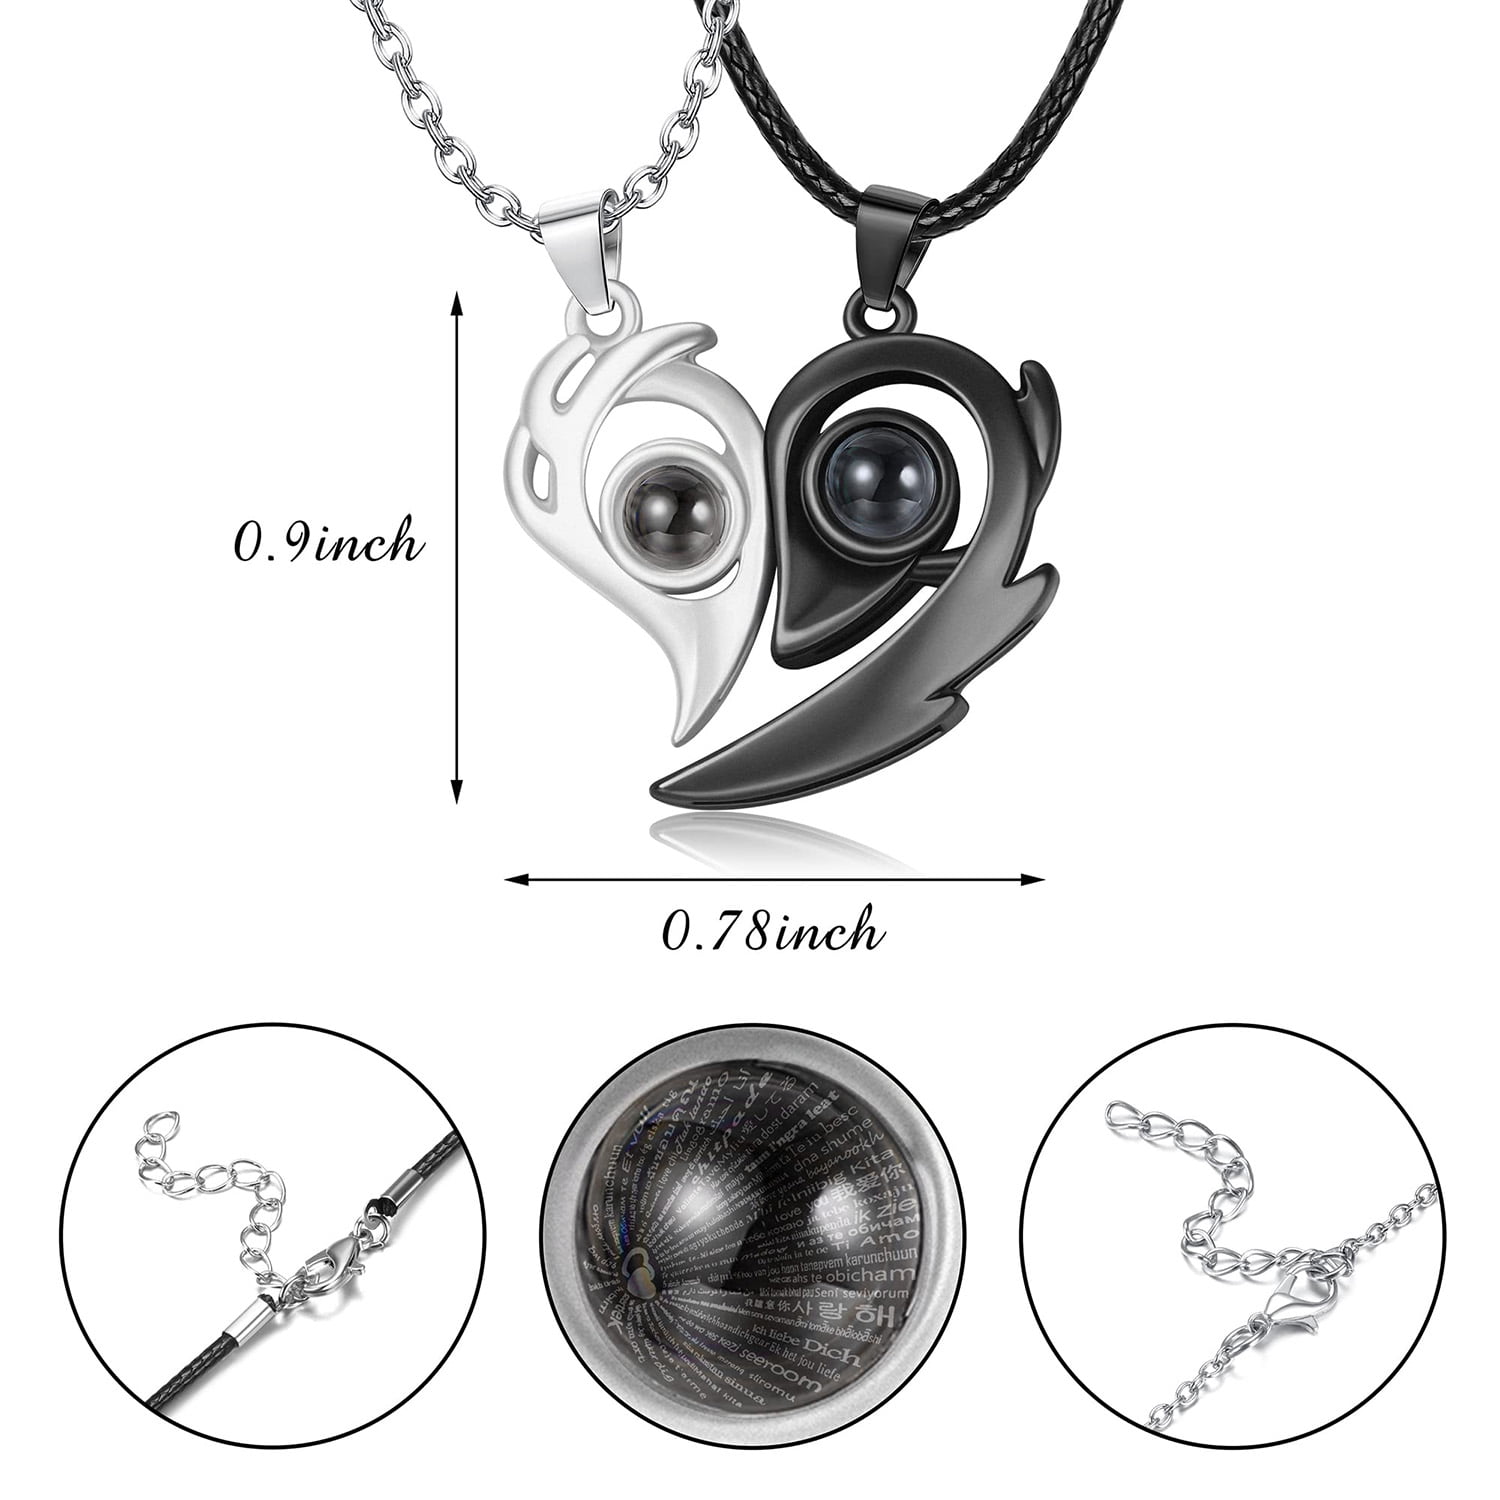 Set Magnetic couple necklace with 2Pcs Lovers Heart Pendant new charm  necklace | eBay